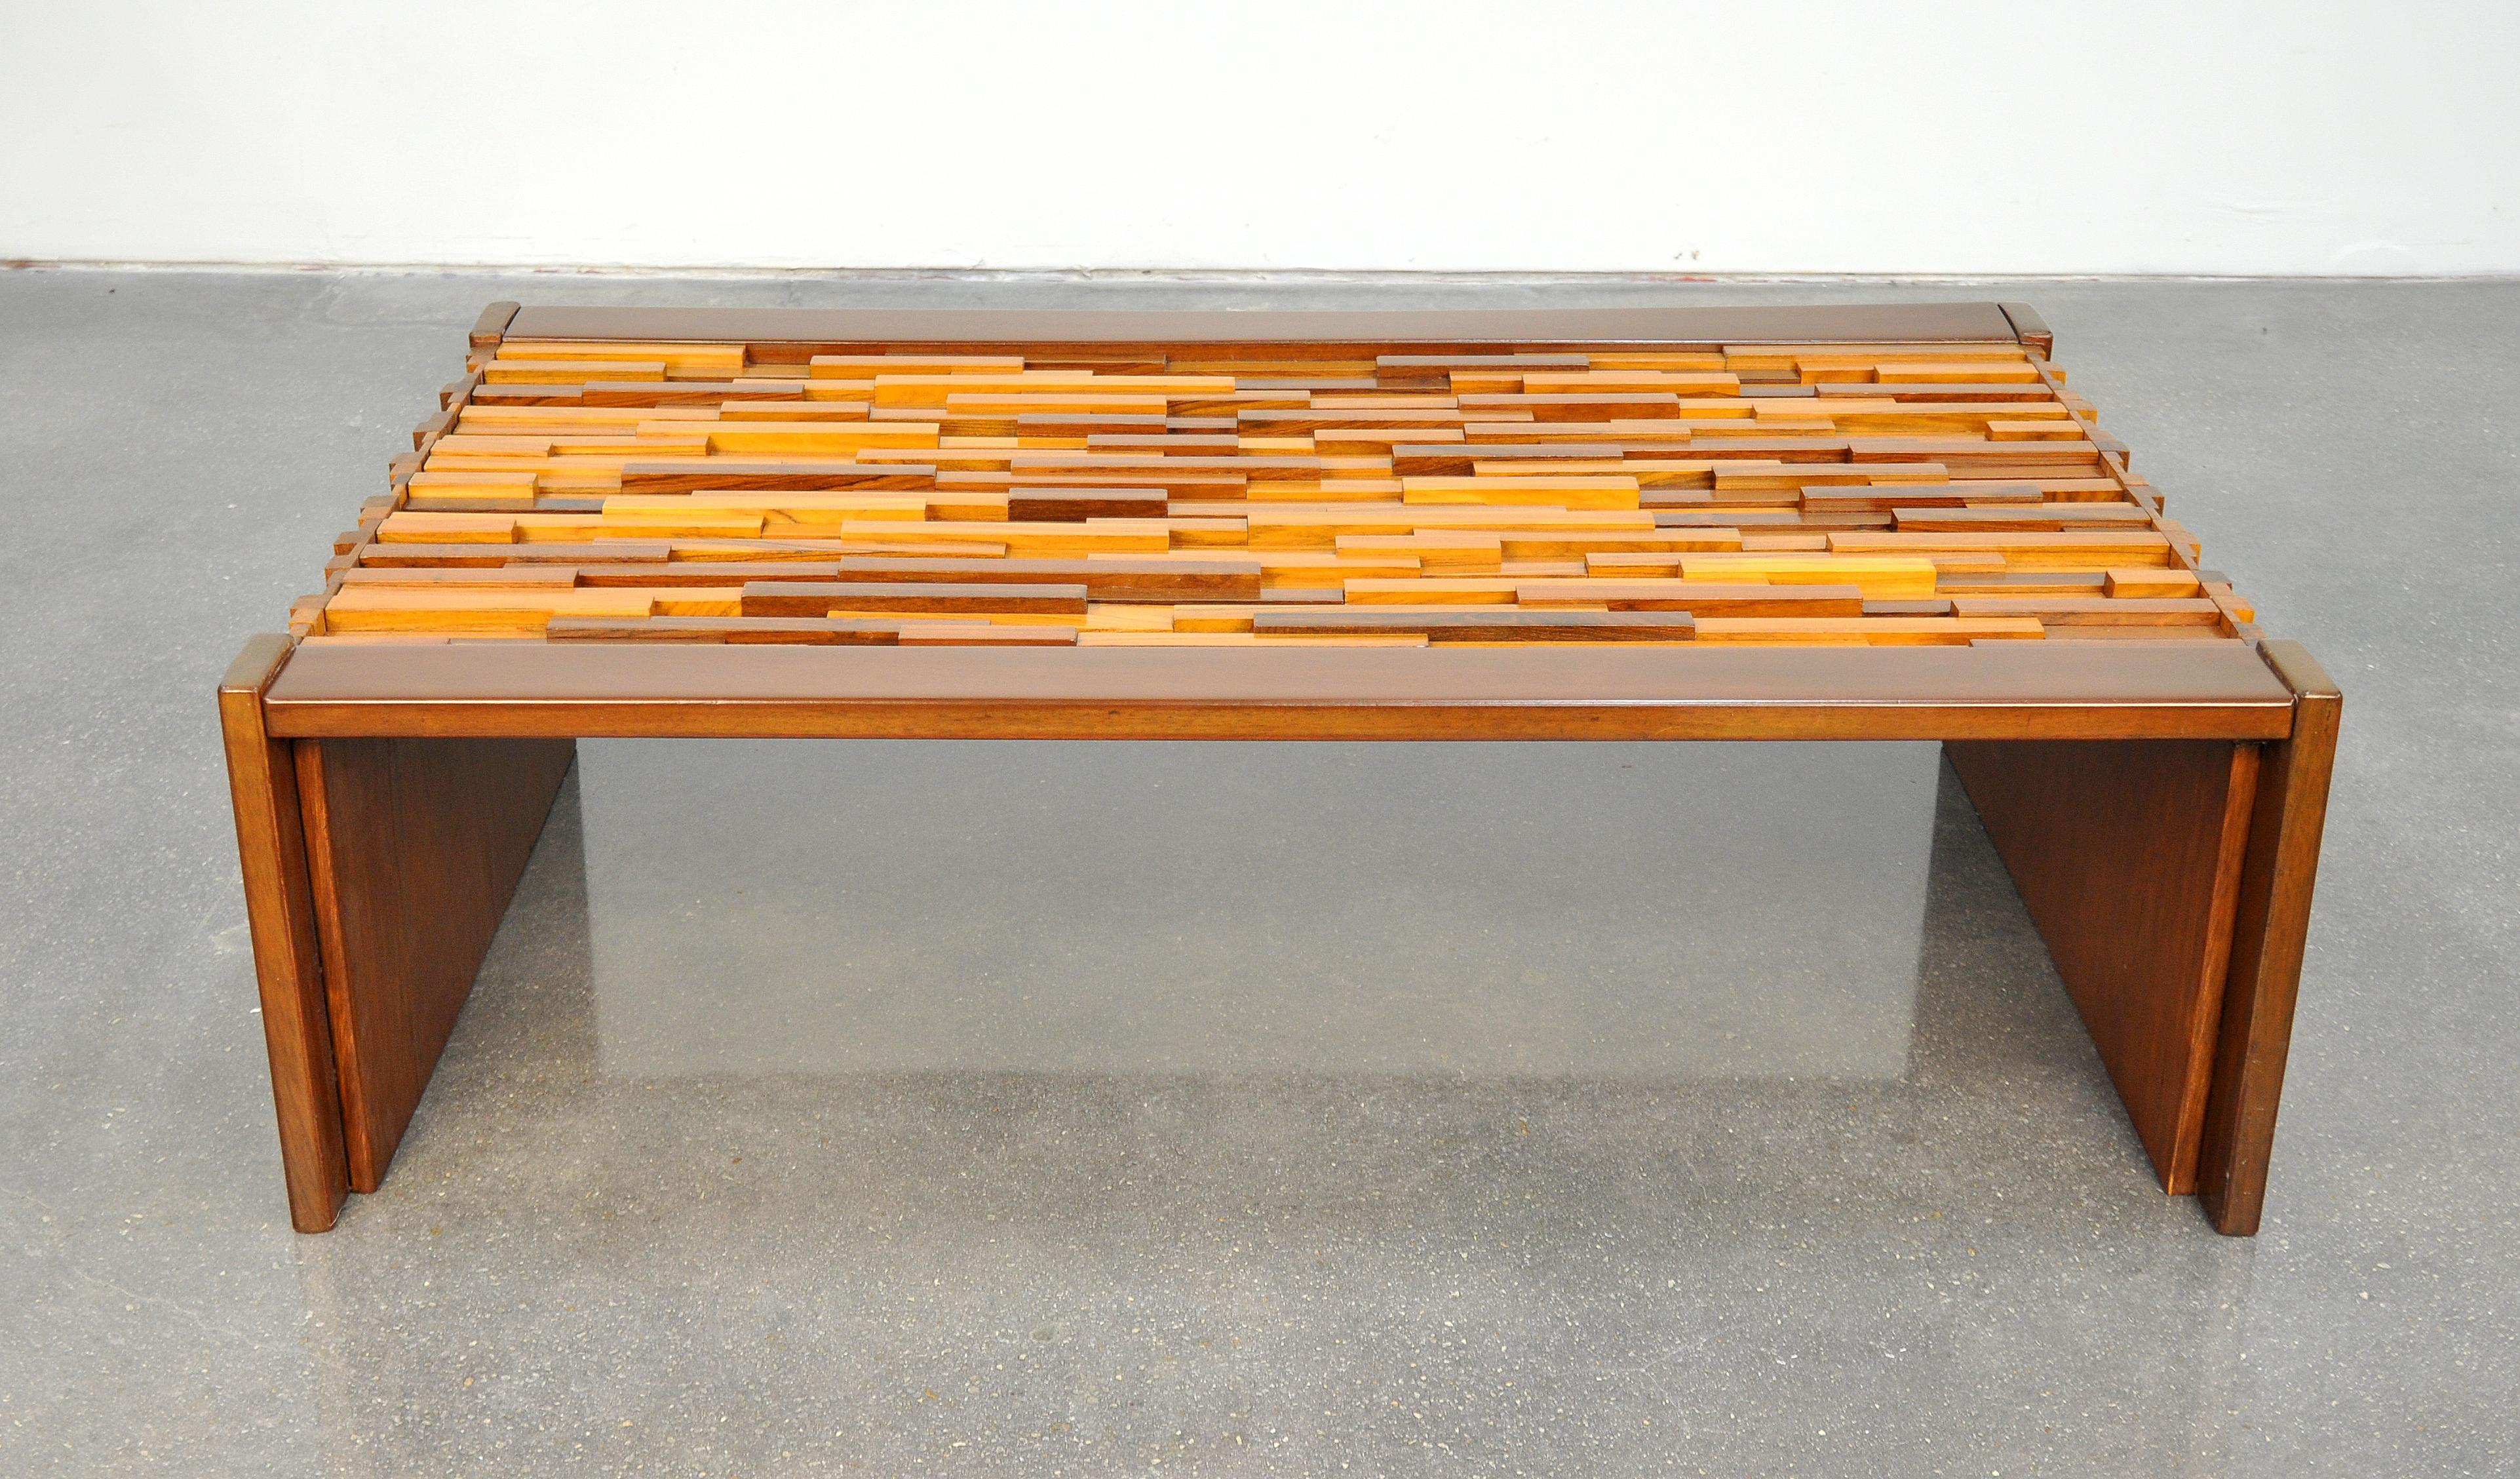 Glass Percival Lafer Rosewood, Teak and Mahogany Brutalist Coffee Table